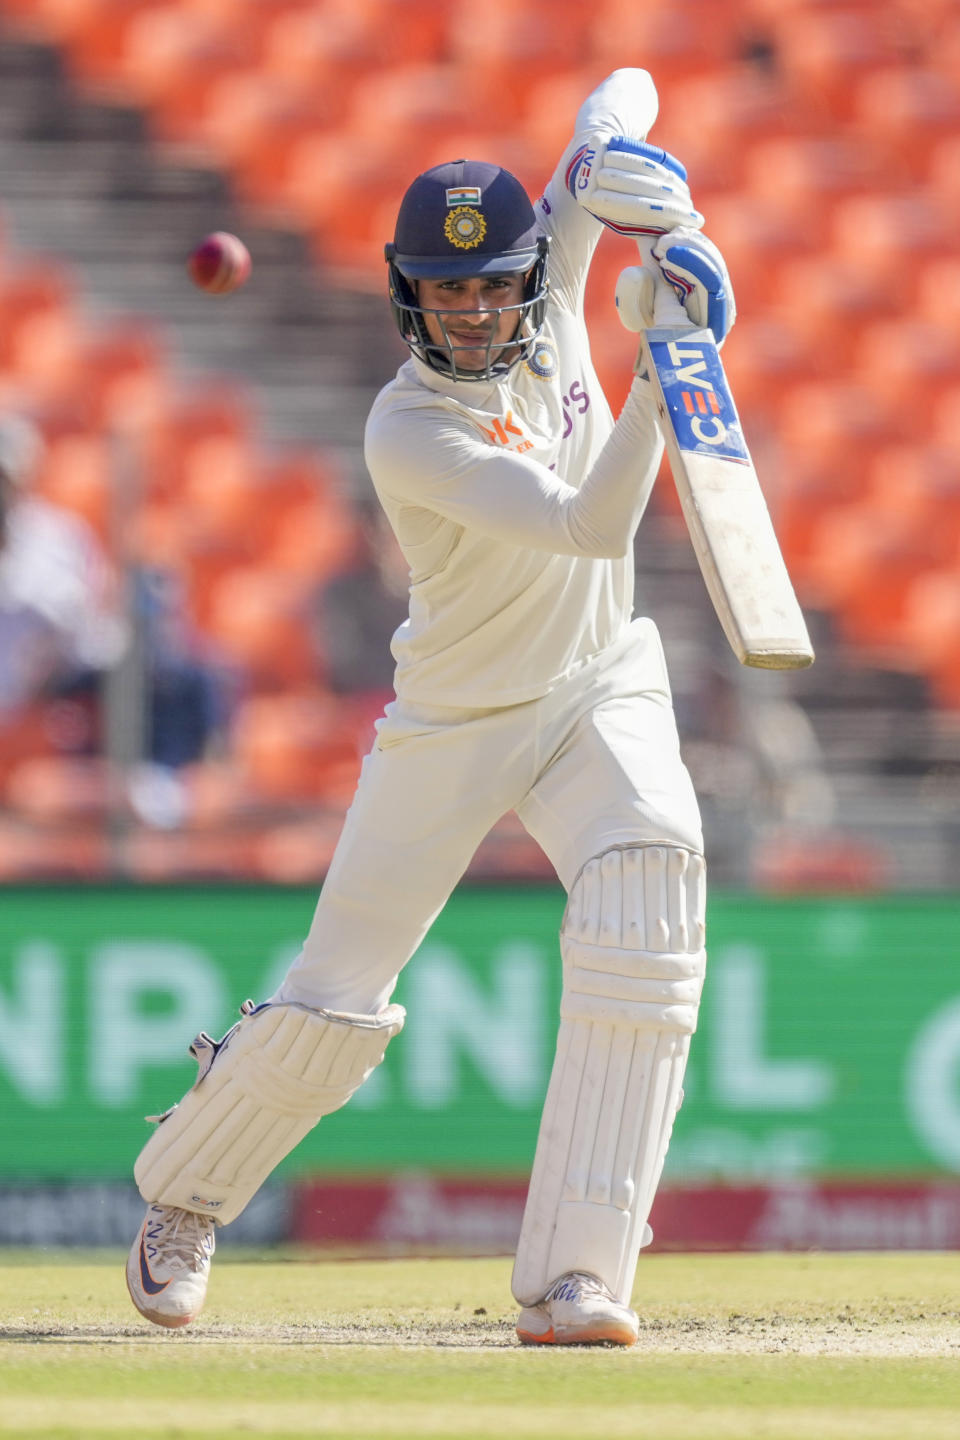 India's Shubman Gill plays a shot during the third day of the fourth cricket test match between India and Australia in Ahmedabad, India, Saturday, March 11, 2023. (AP Photo/Ajit Solanki)